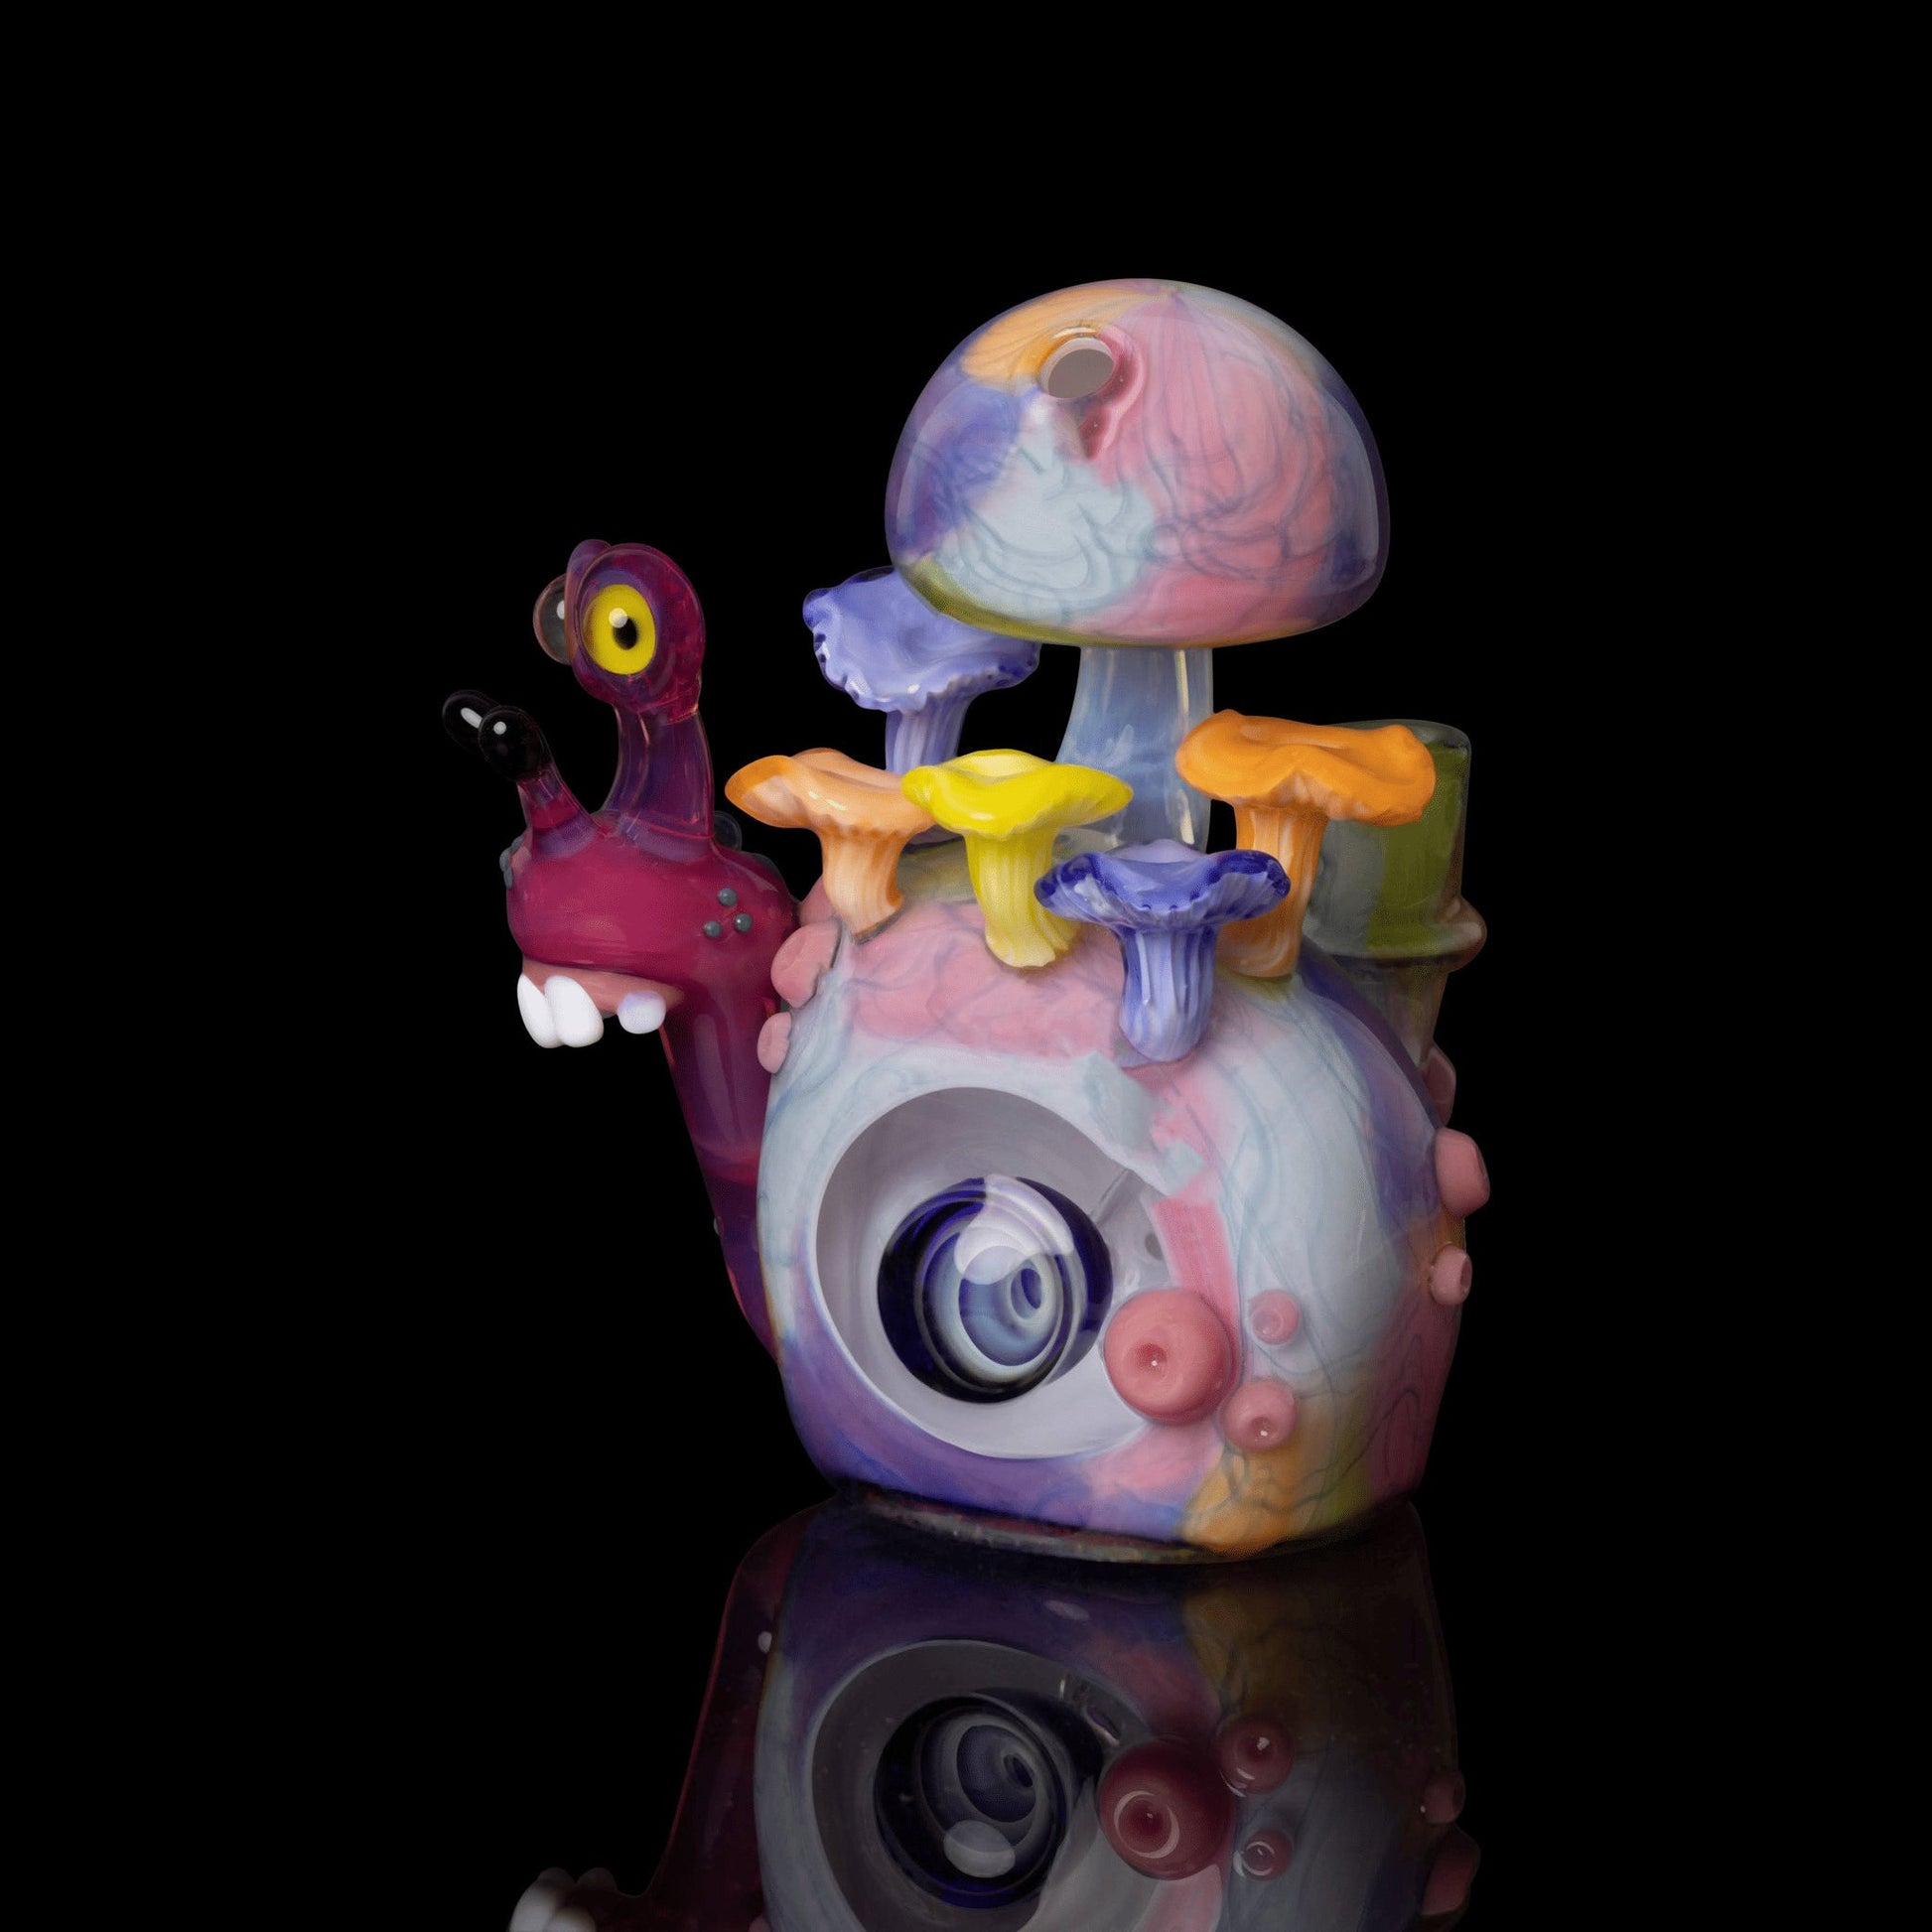 sophisticated design of the Collab Snail Rig by Brandon Martin x Scomo Moanet (Scribble Season 2022)